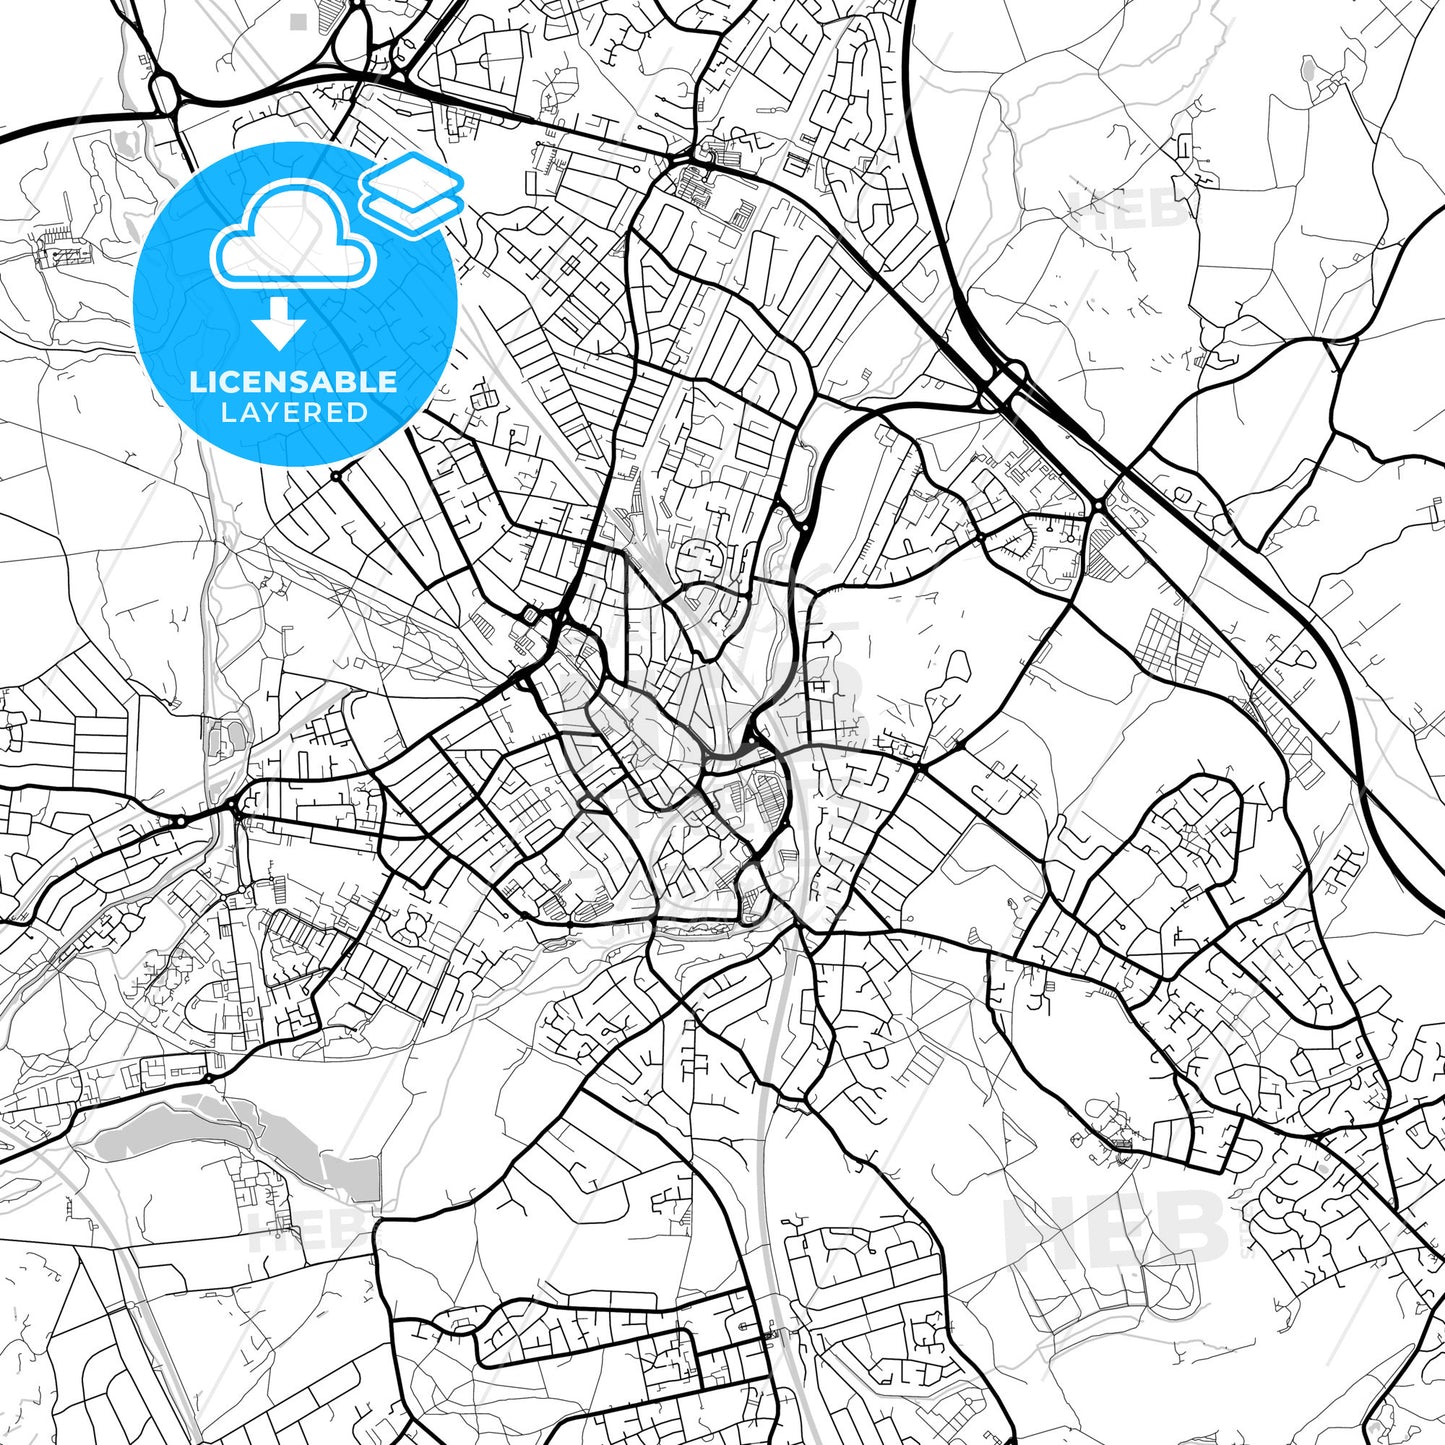 Layered PDF map of Watford, East of England, England